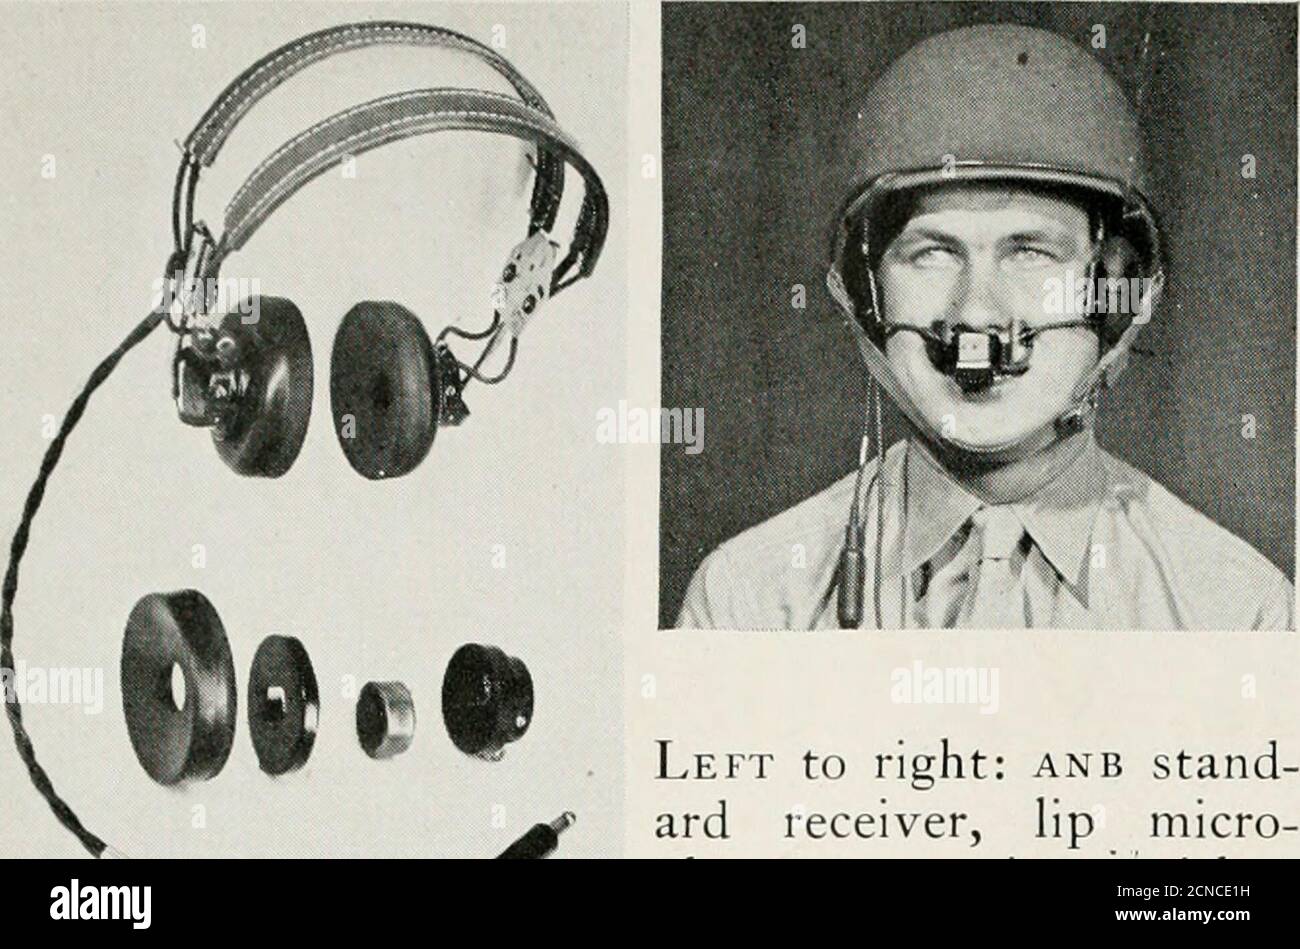 . Bell telephone magazine . shouldwithstand the rough and varied usageof modern warfare. * See Magazine: Electric Brain, Winter1943-44; Bell Laboratories in the War,Winter 1944-45; Radar and Bell Laboratories,Winter 1945-46. Noise is one of the chief obstacleswhich has to be overcome in devisinginstruments suitable for the ArmedForces. Another consideration isthat of varying climatic conditions.Still another is the occurrence of rapidtemperature and pressure changes—as with a plane rising or descendingsharply. Instruments must be de-signed, therefore, to operate over anextremely wide range of Stock Photo